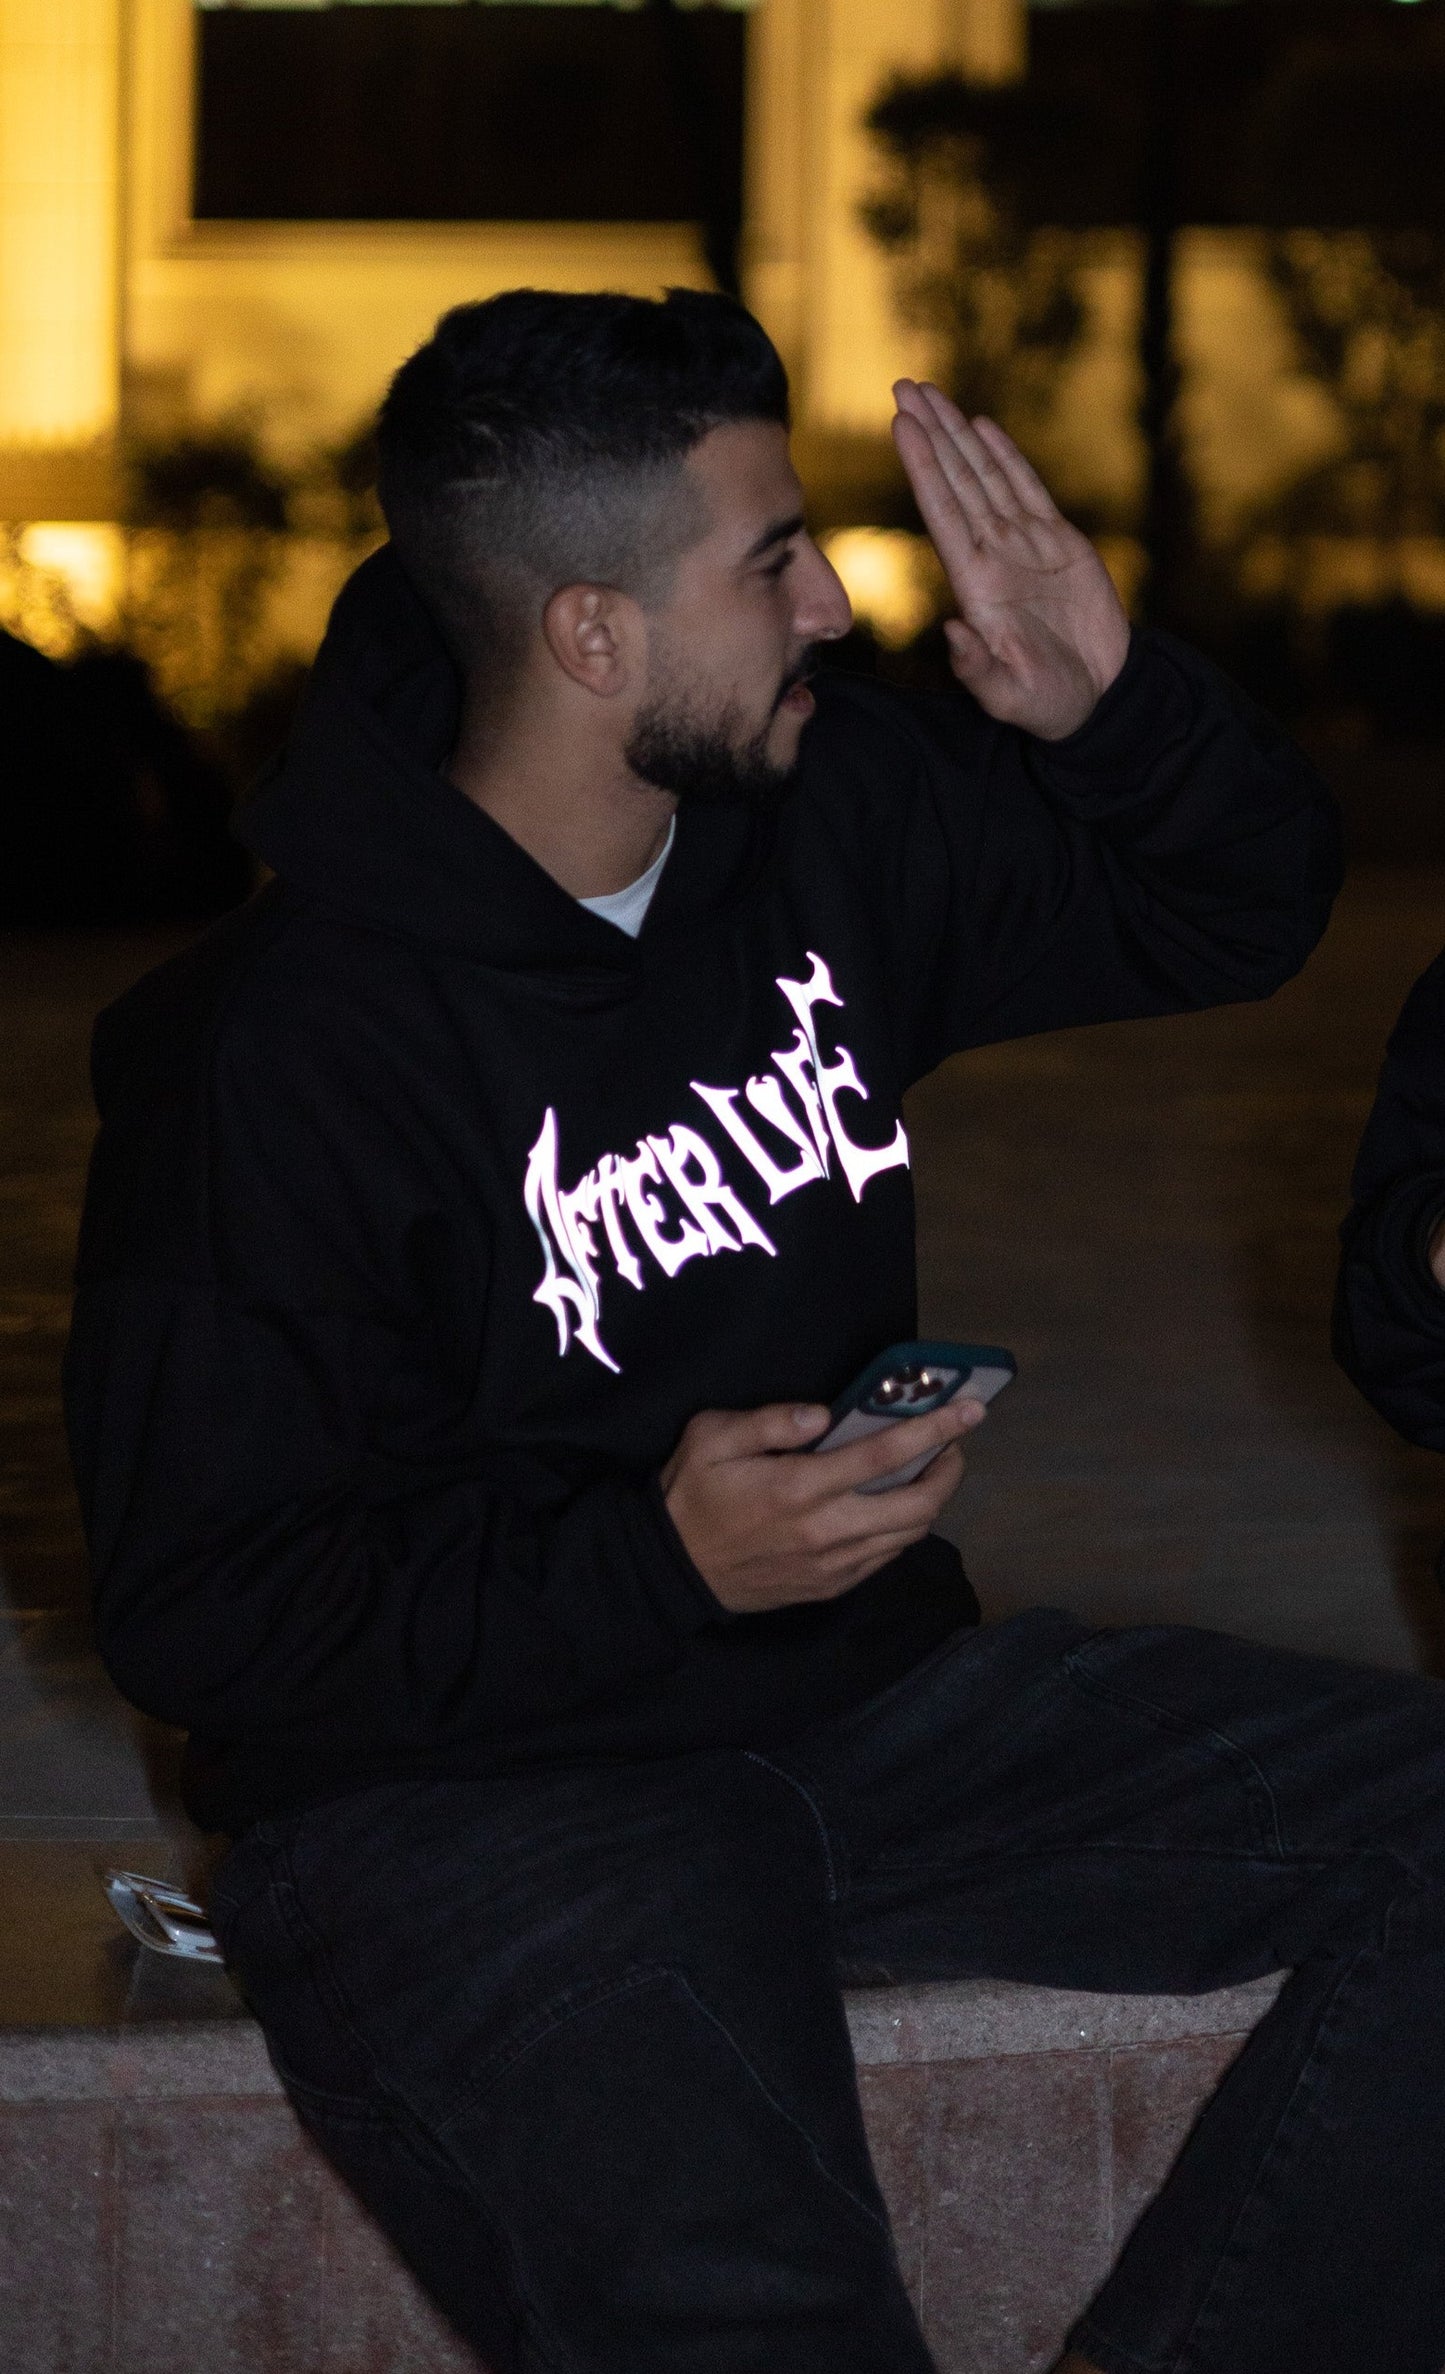 Edgy black oversized hoodie with glowing reflective "After Life" text and logo graphic when hit by light - made for making a scene at night festivals.